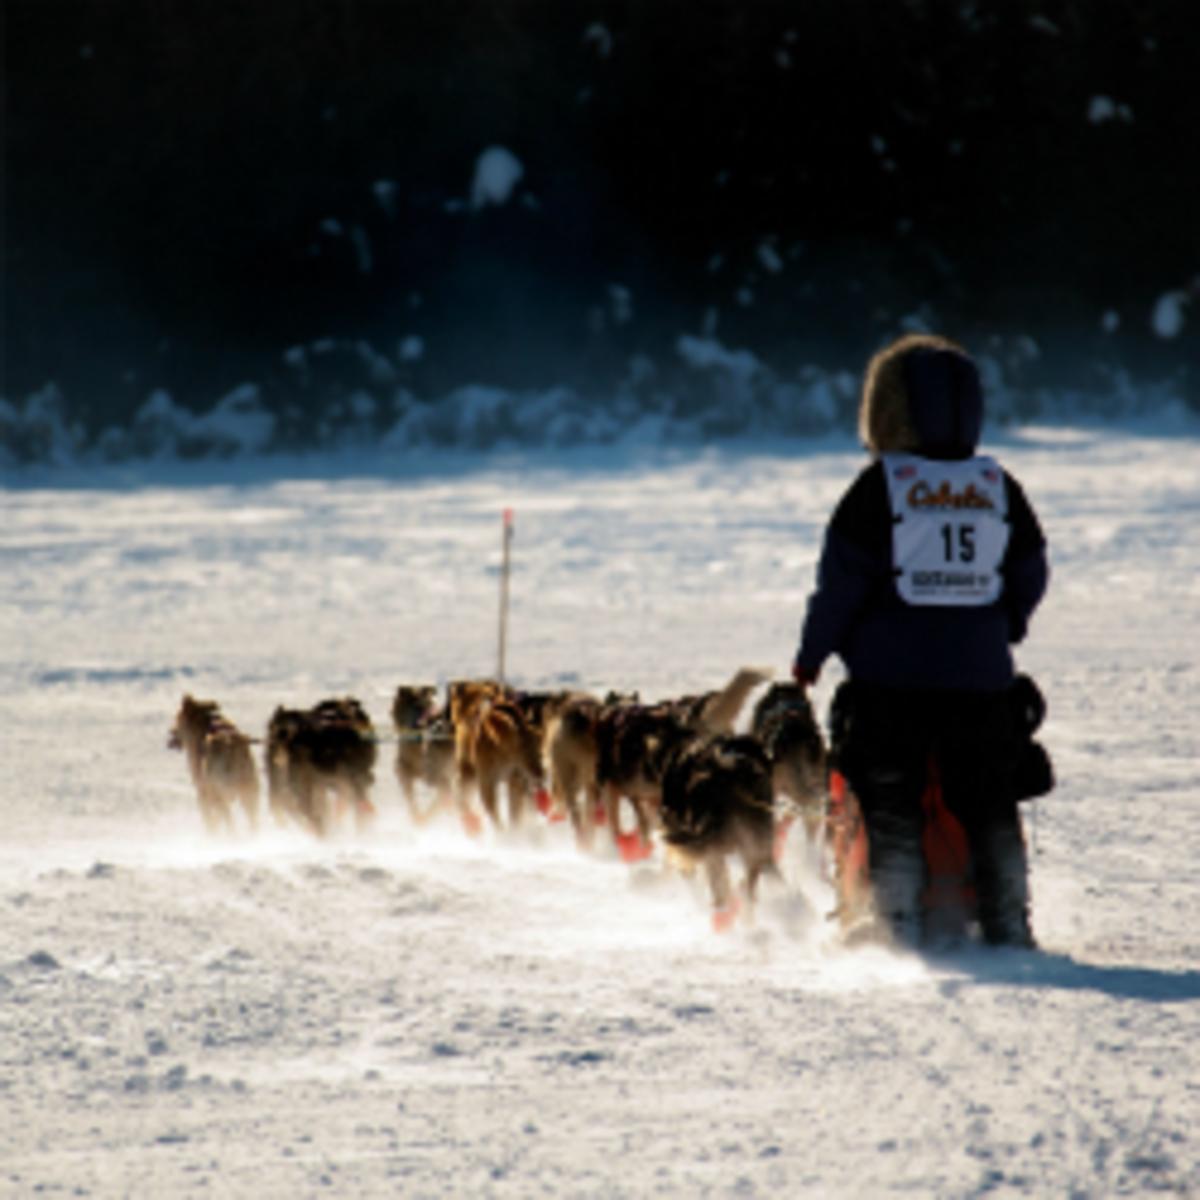 A lost dog has caused a Canadian musher to withdraw from the Iditarod race.